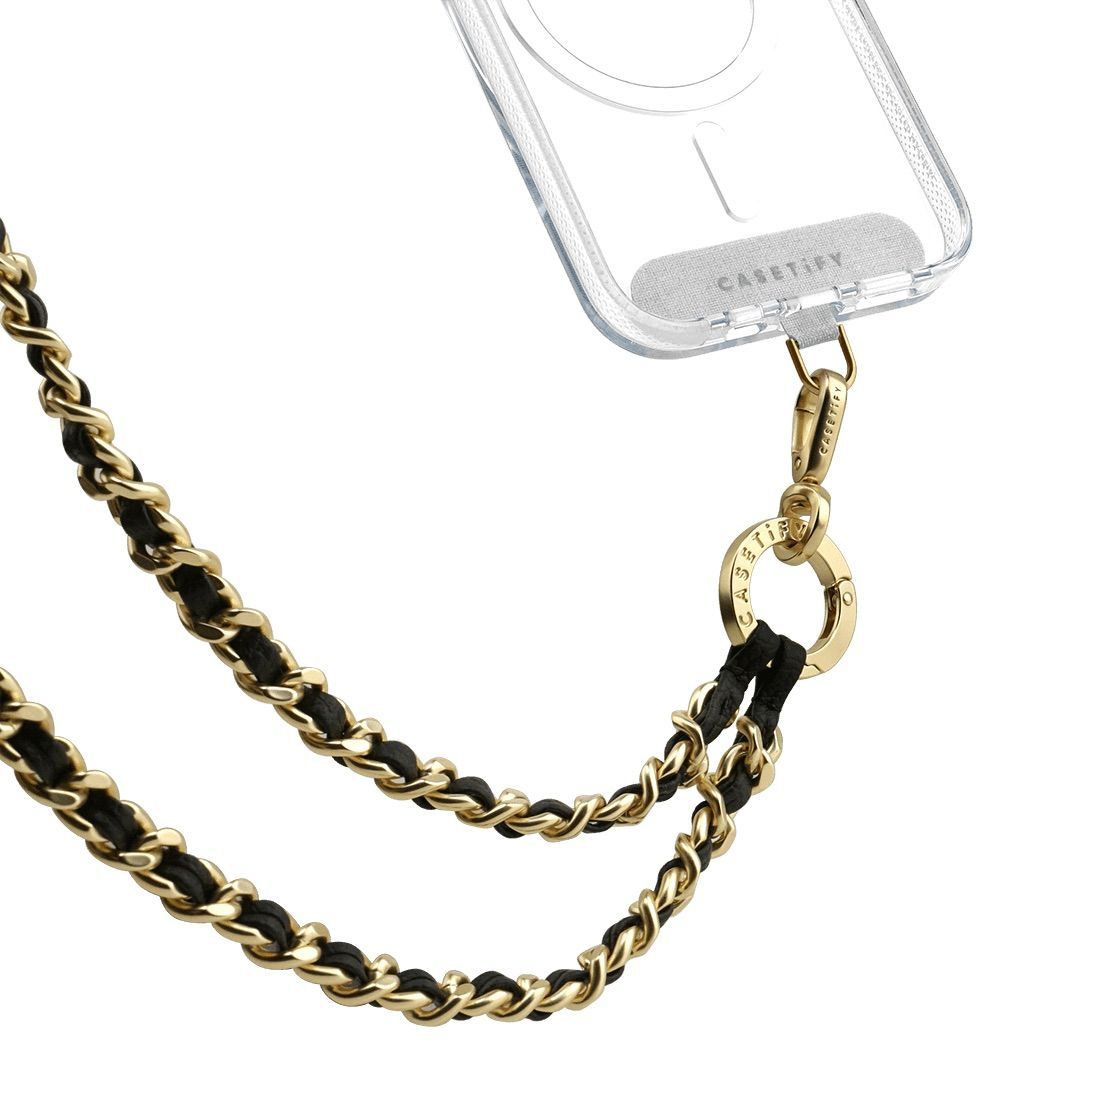 Leather Chain Cross-body Strap - Black in Champagne Gold | Casetify (Global)